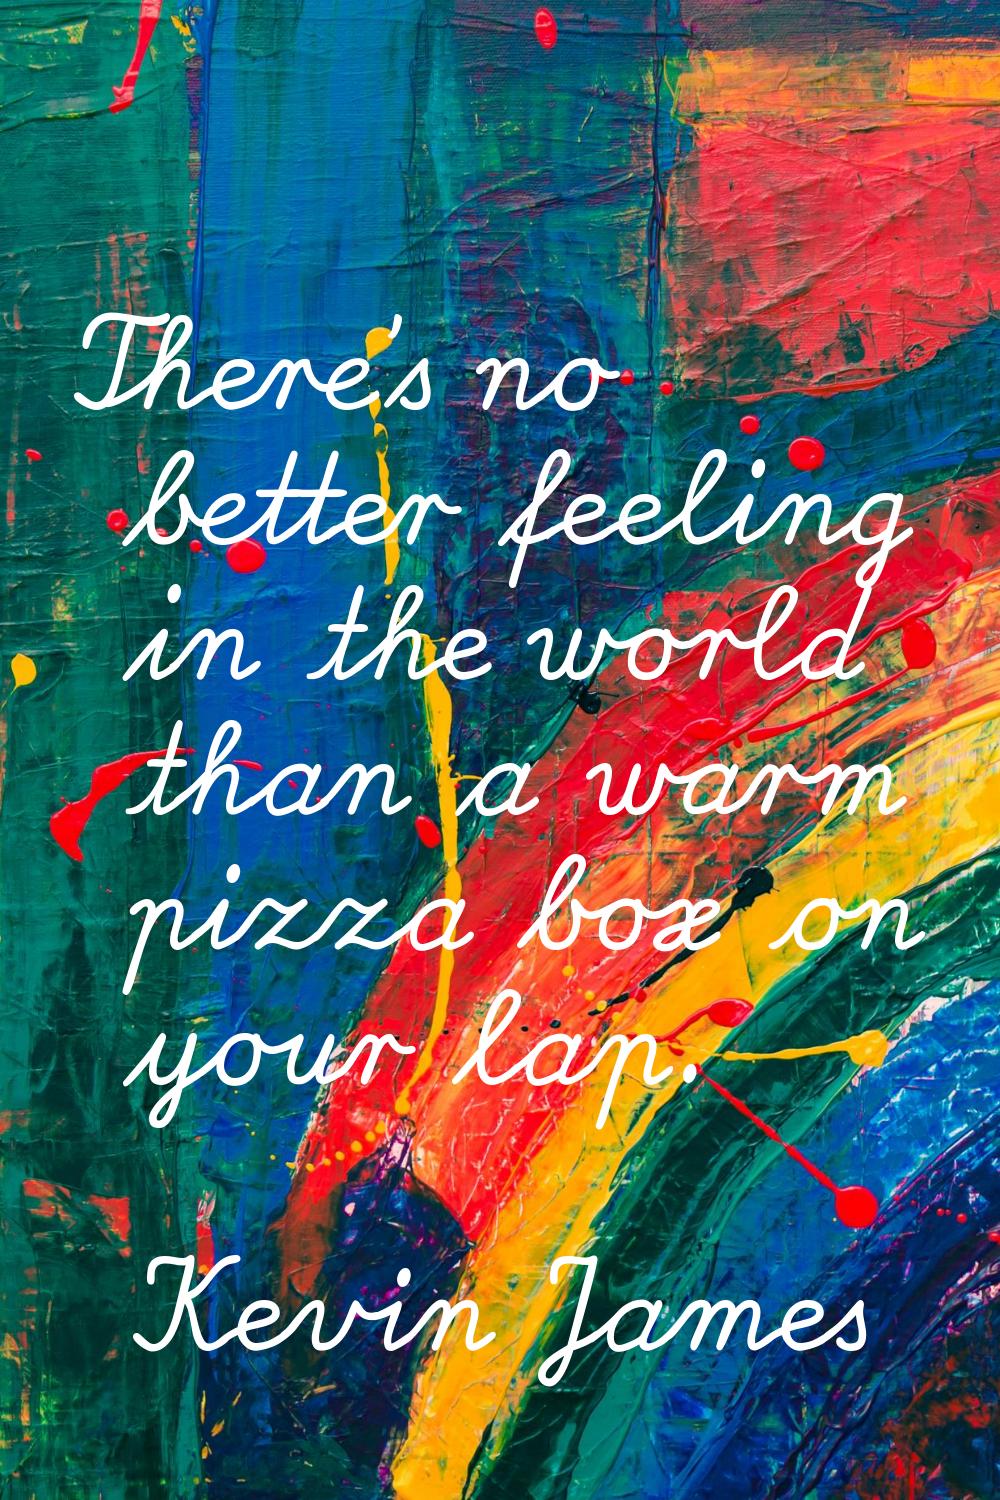 There's no better feeling in the world than a warm pizza box on your lap.